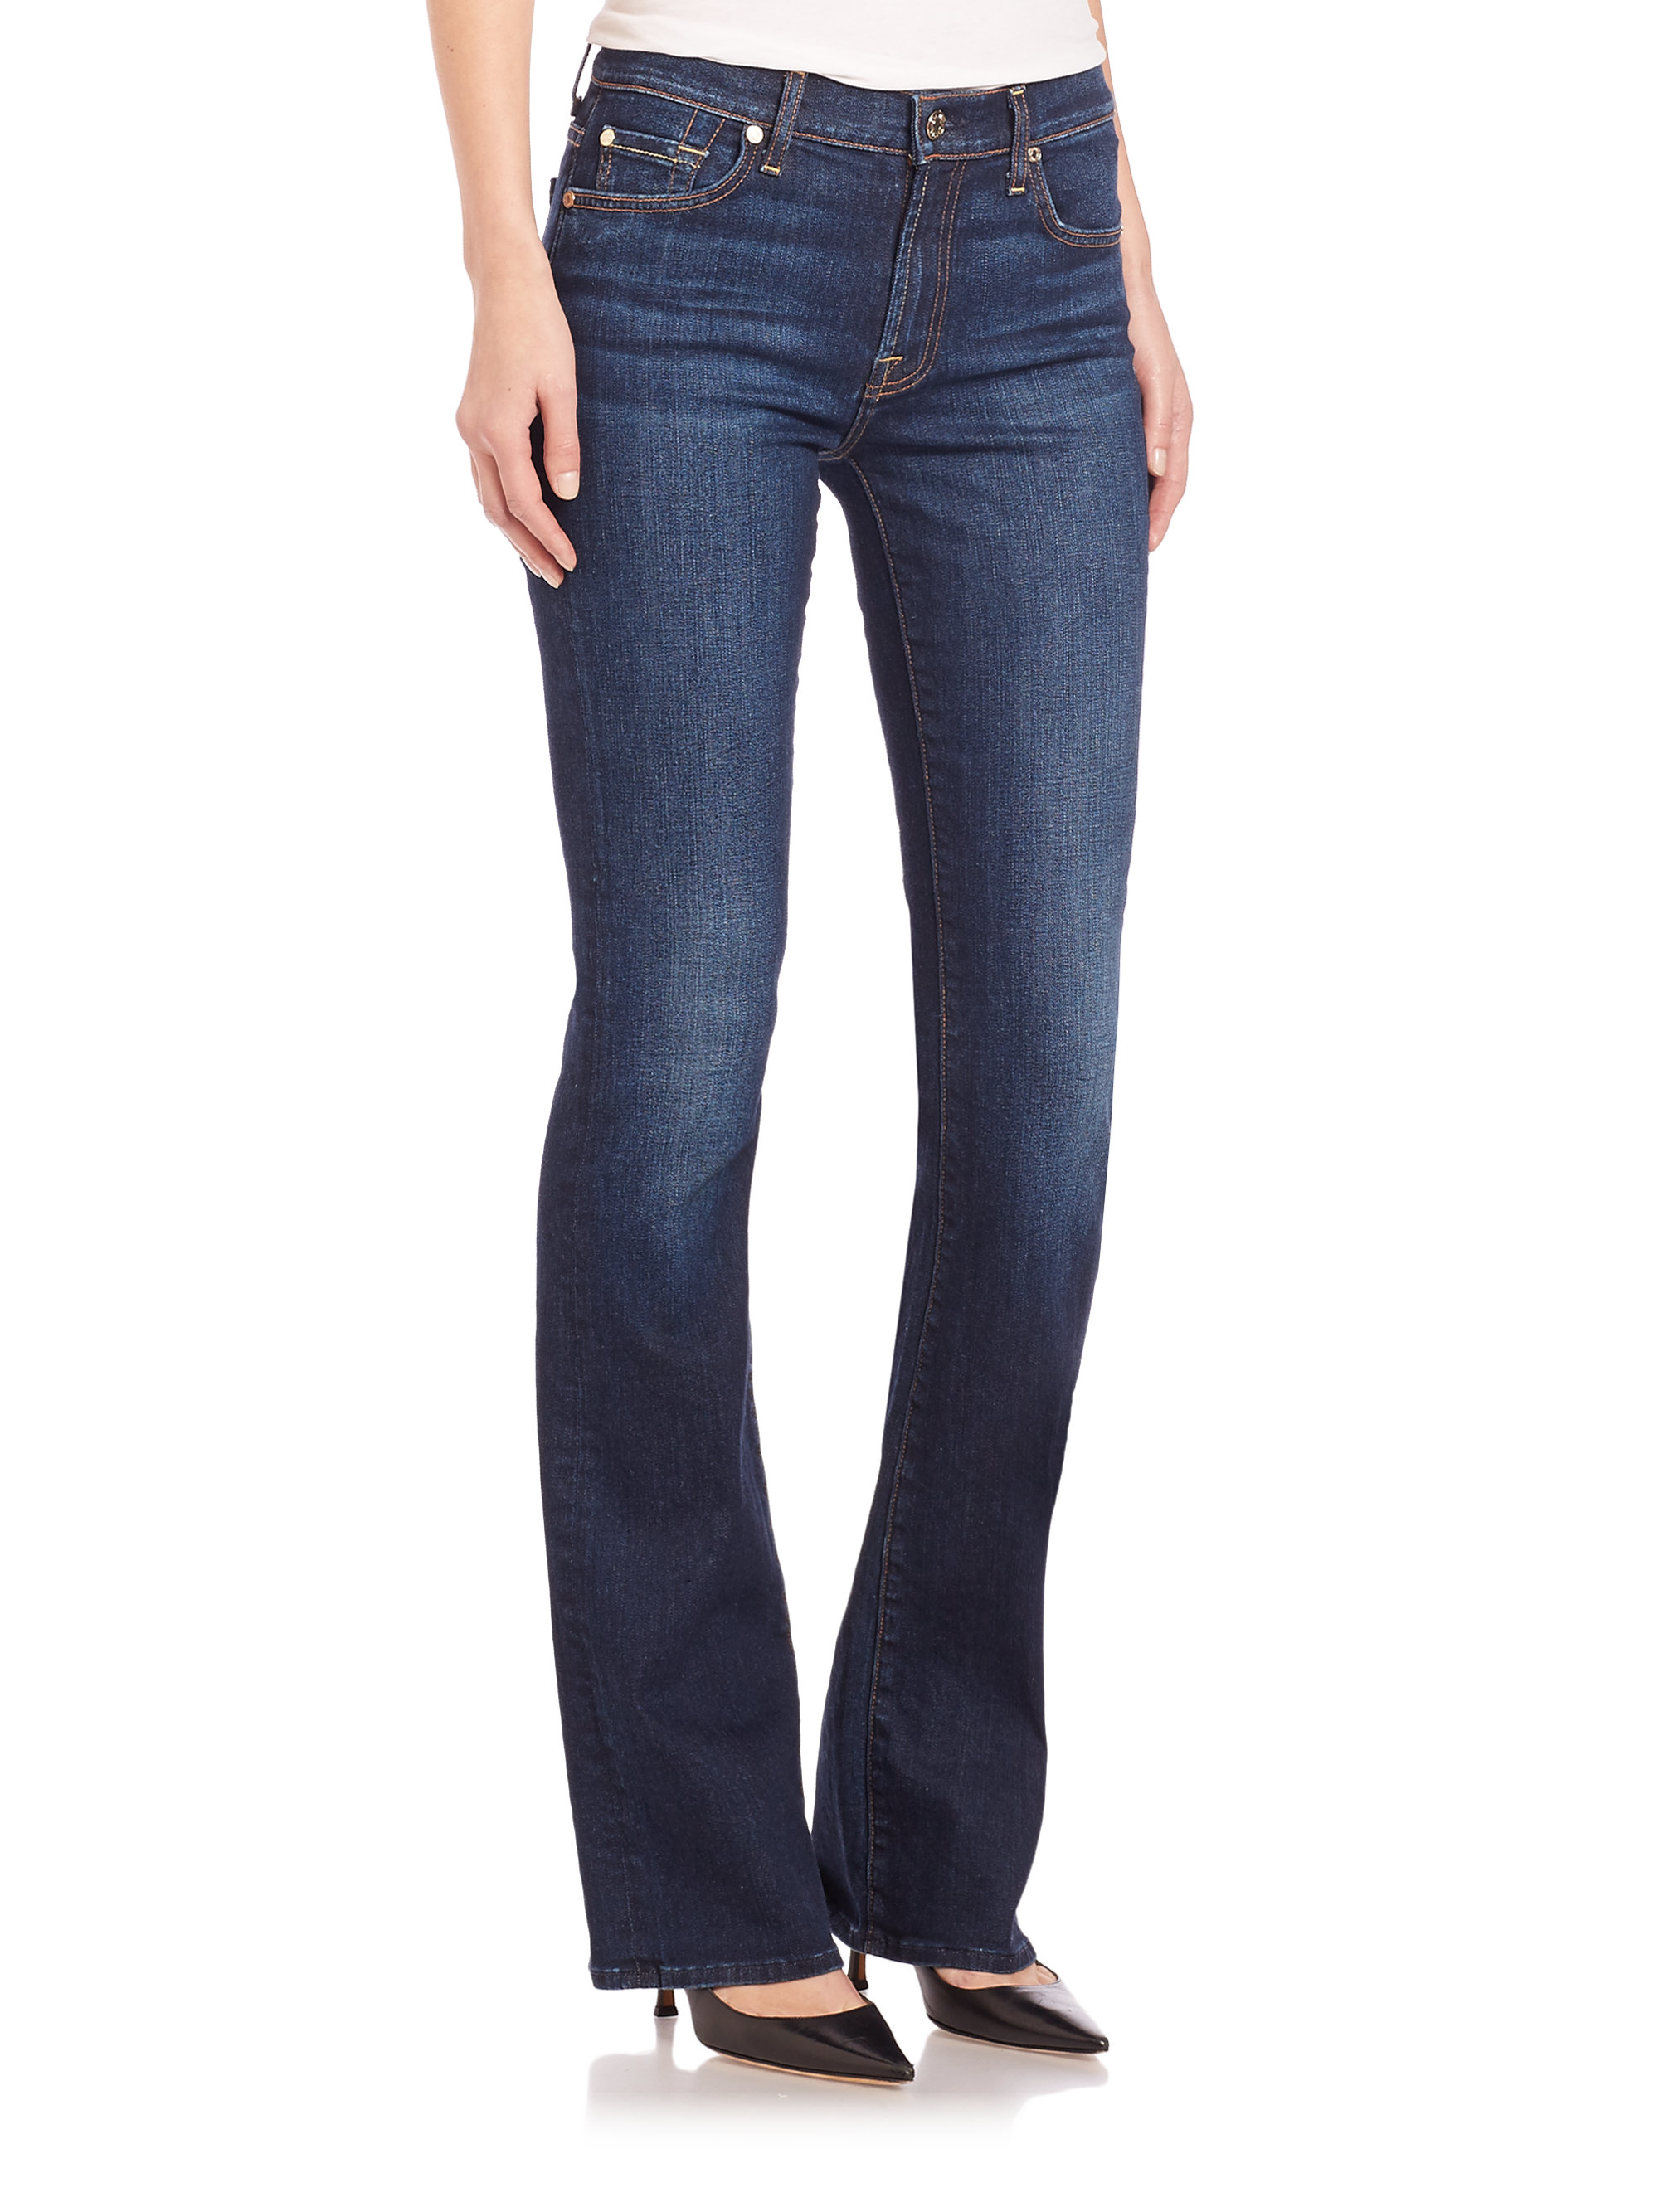 7 For All Mankind Iconic Bootcut Jeans in Blue - Lyst